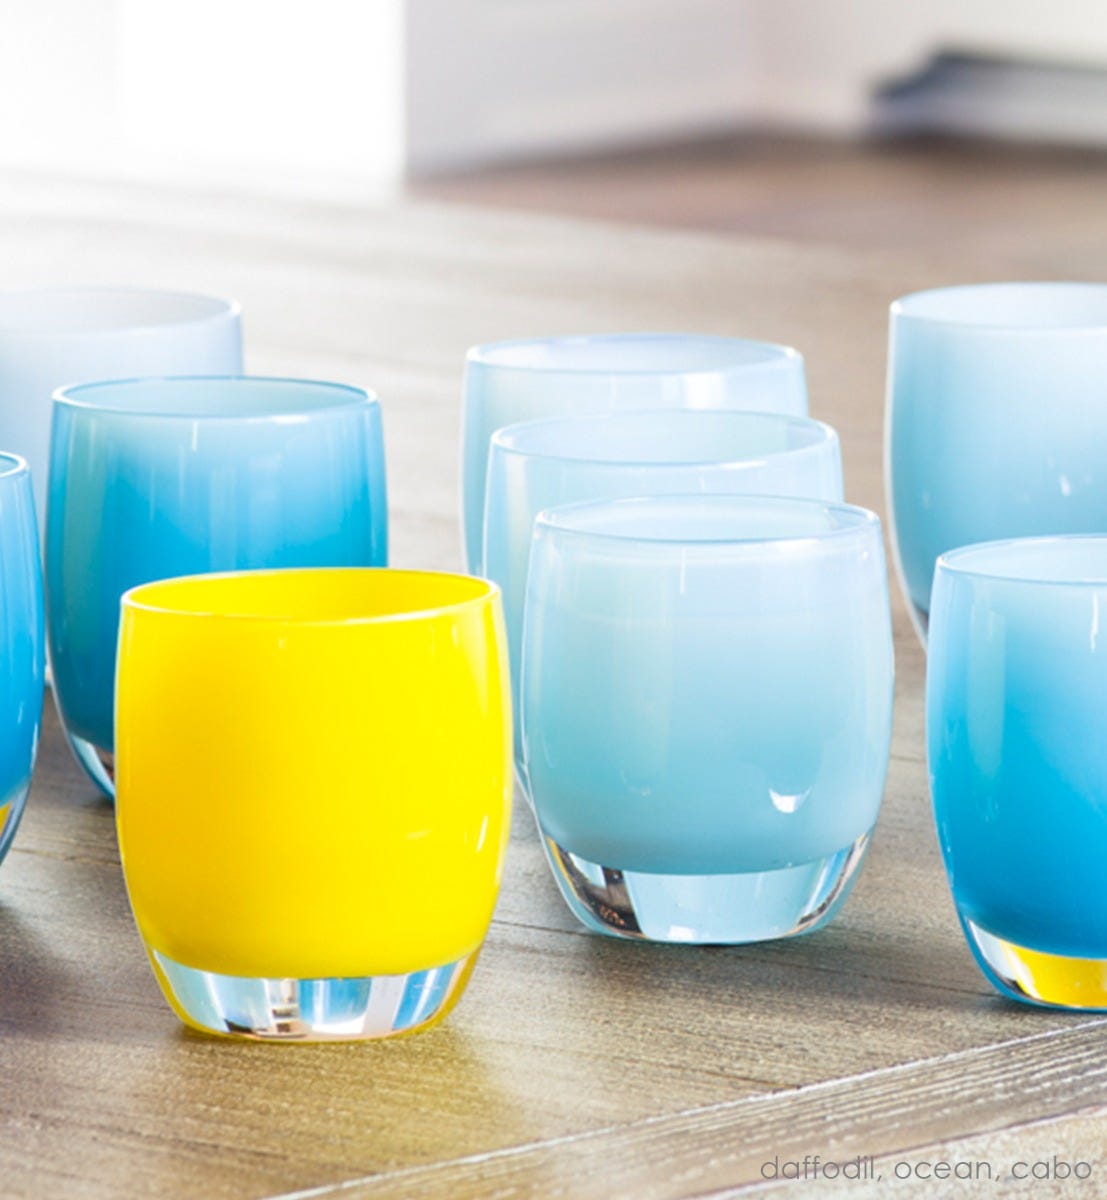 ocean light blue hand-blown glass votive candle holder. Paired with daffodil and cabo.